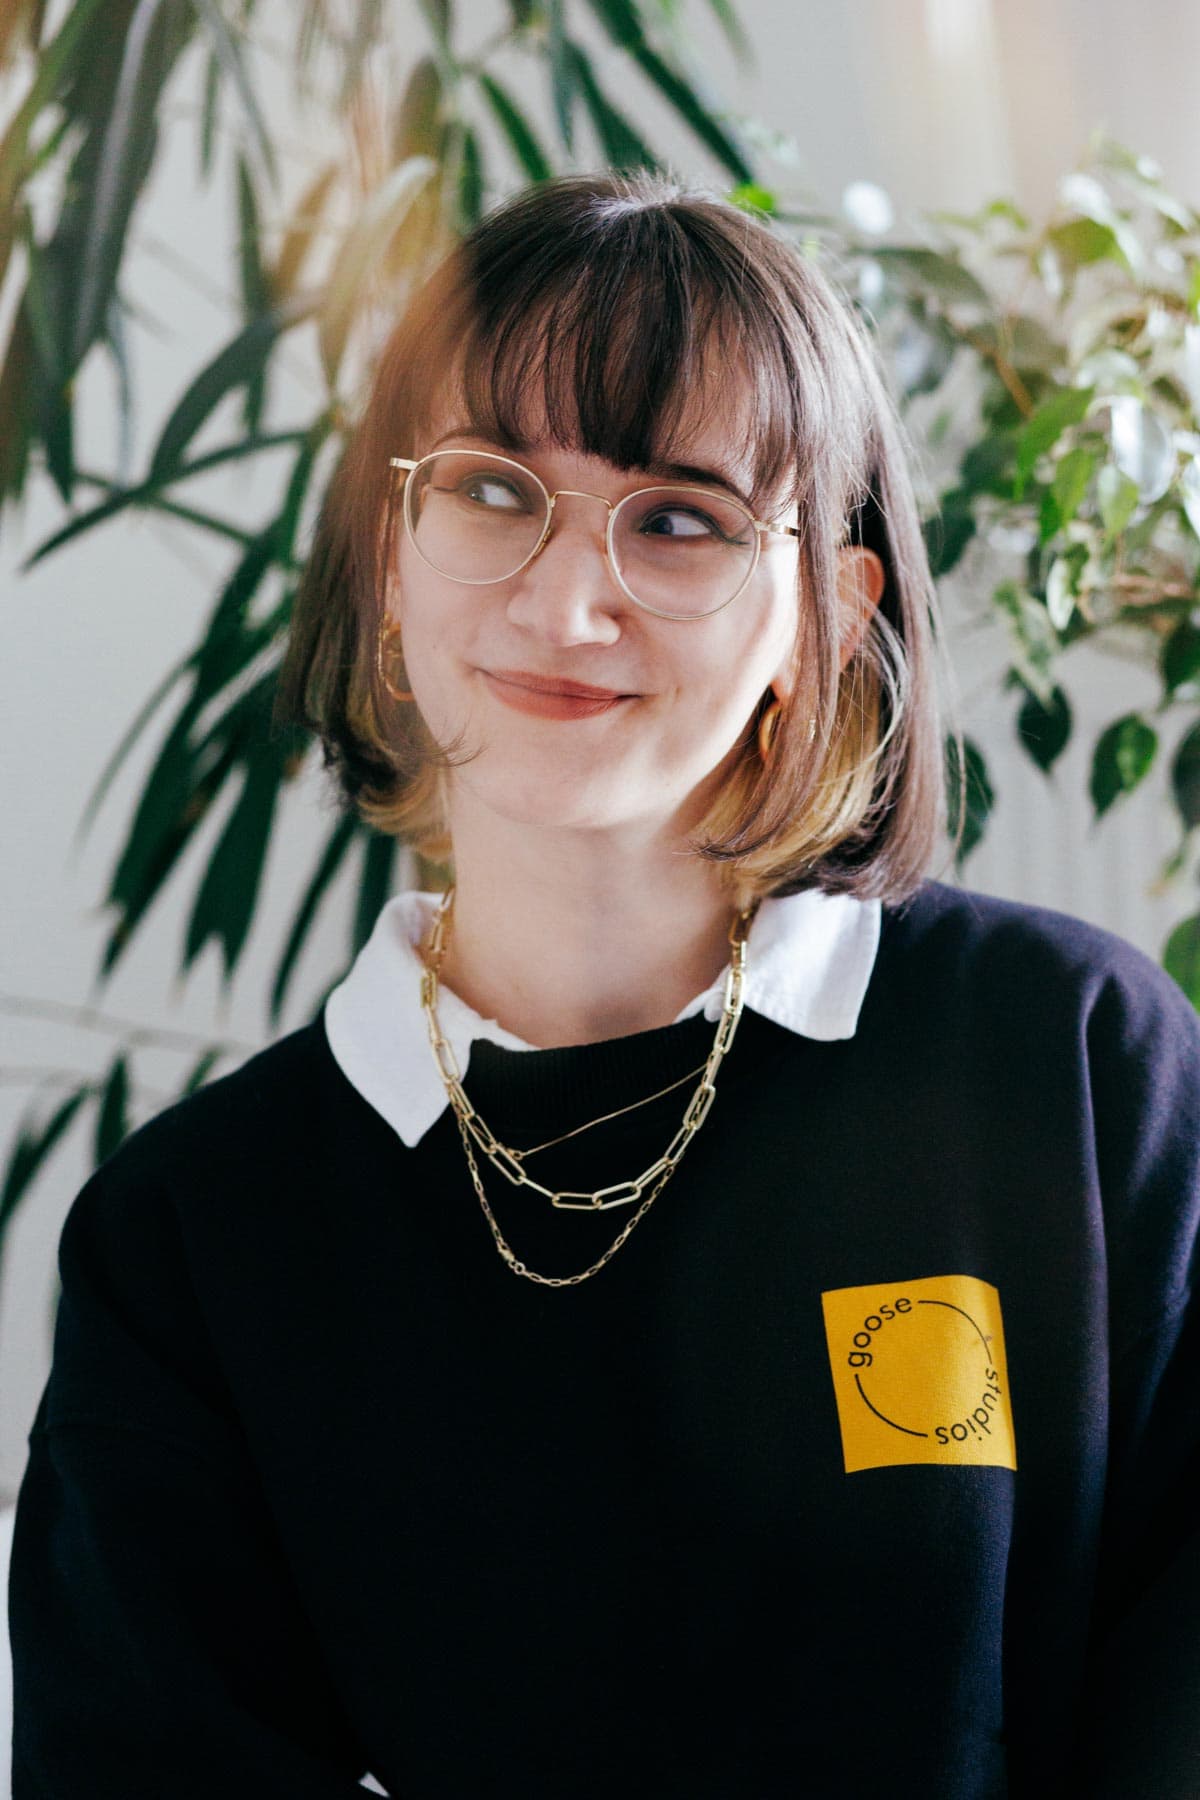 A portrait of a woman smiling and looking to the side wearing a black jumper and featuring many plants in the background. 